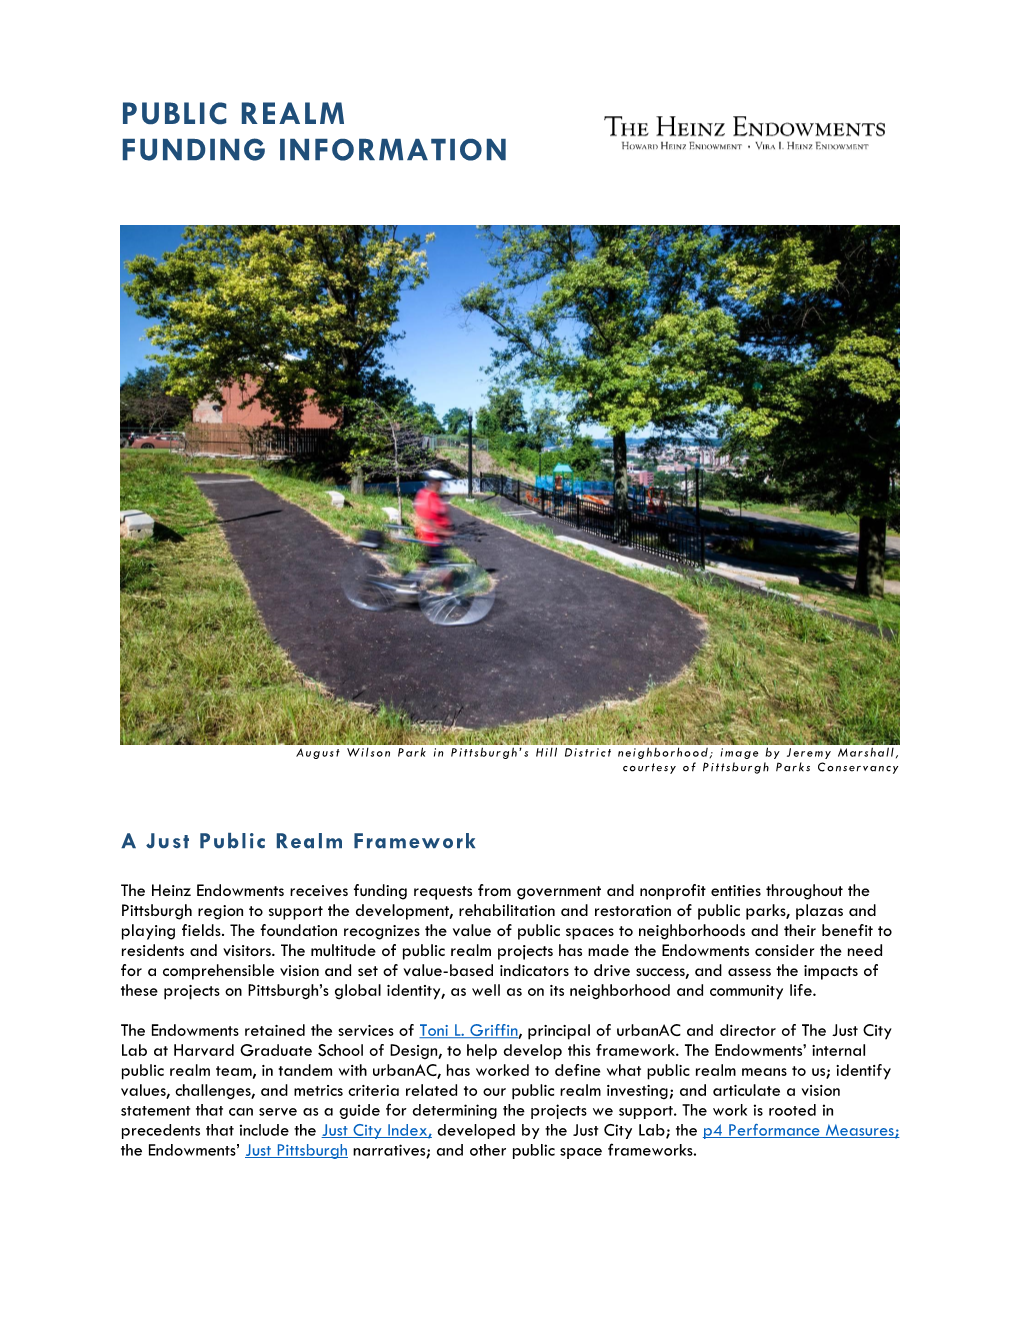 Public Realm Funding Information